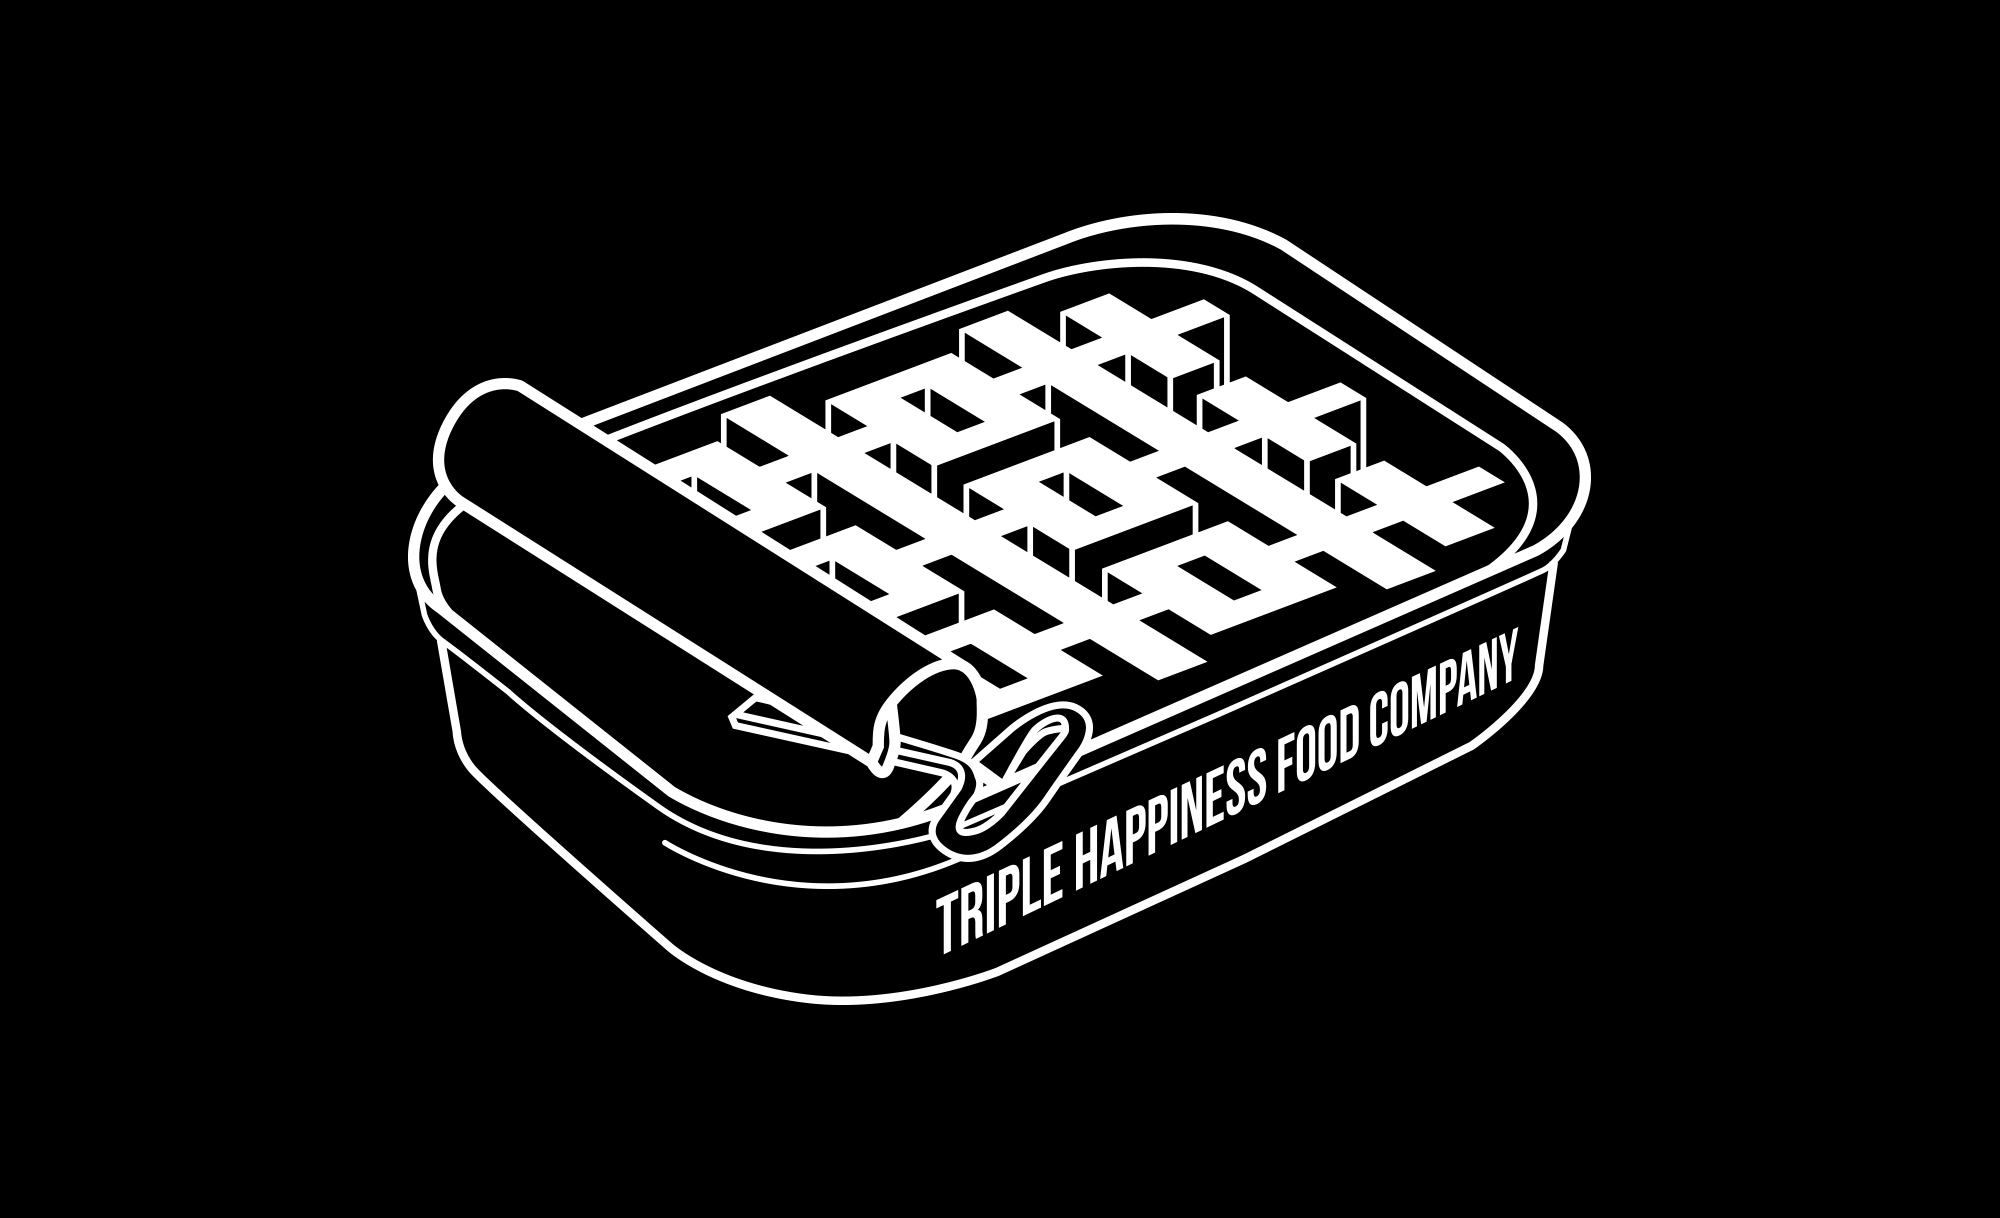 Triple Happiness Food Company logo designed by Elsie Lam